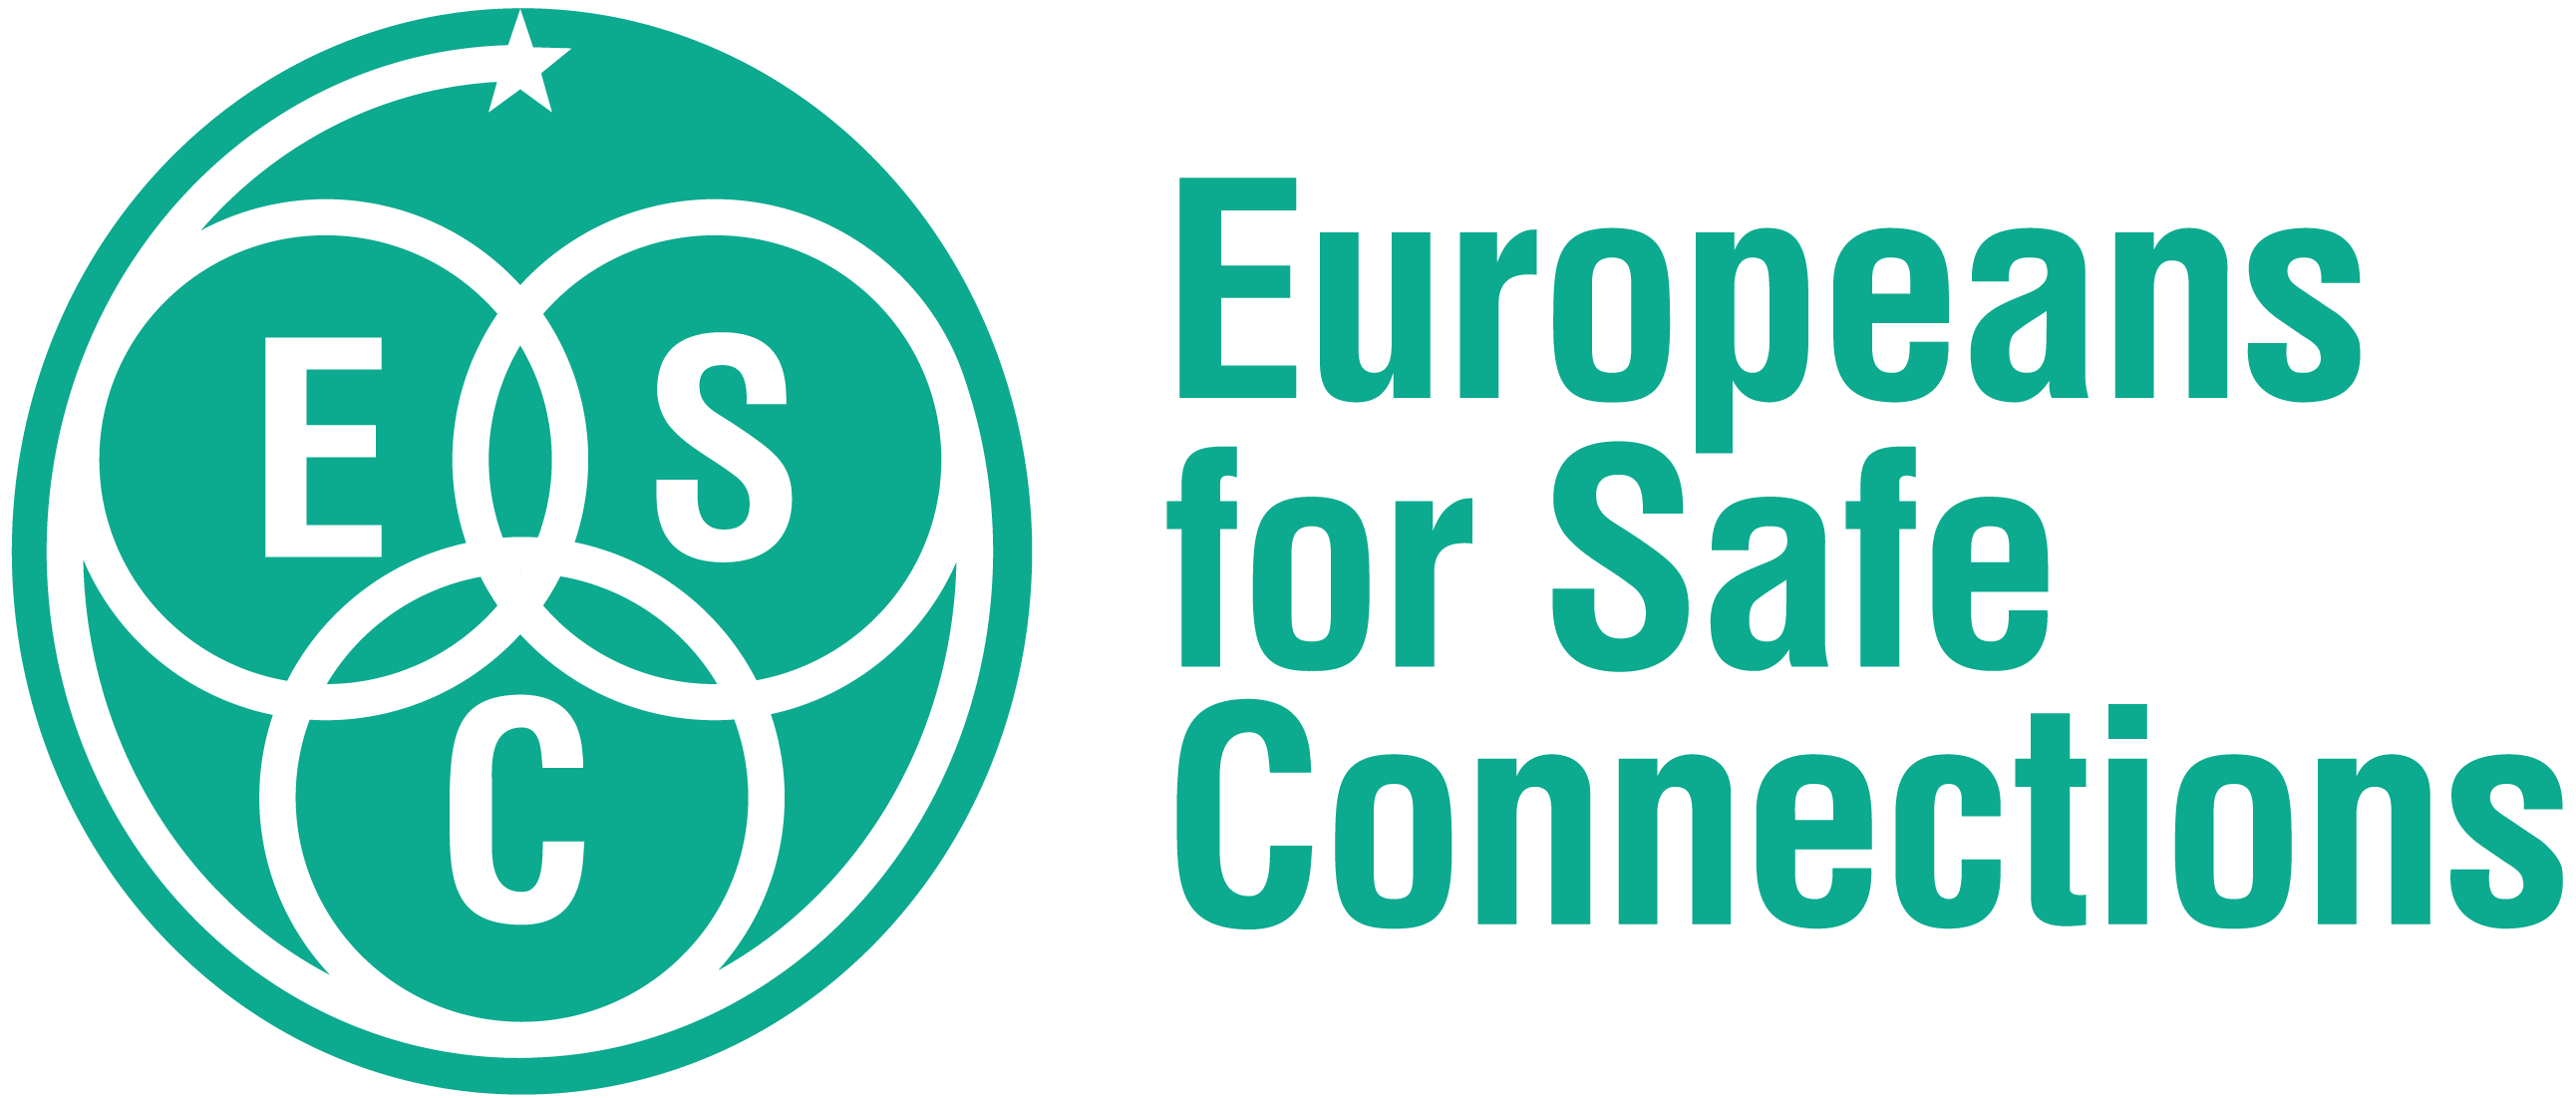 Europeans for Safe Connections